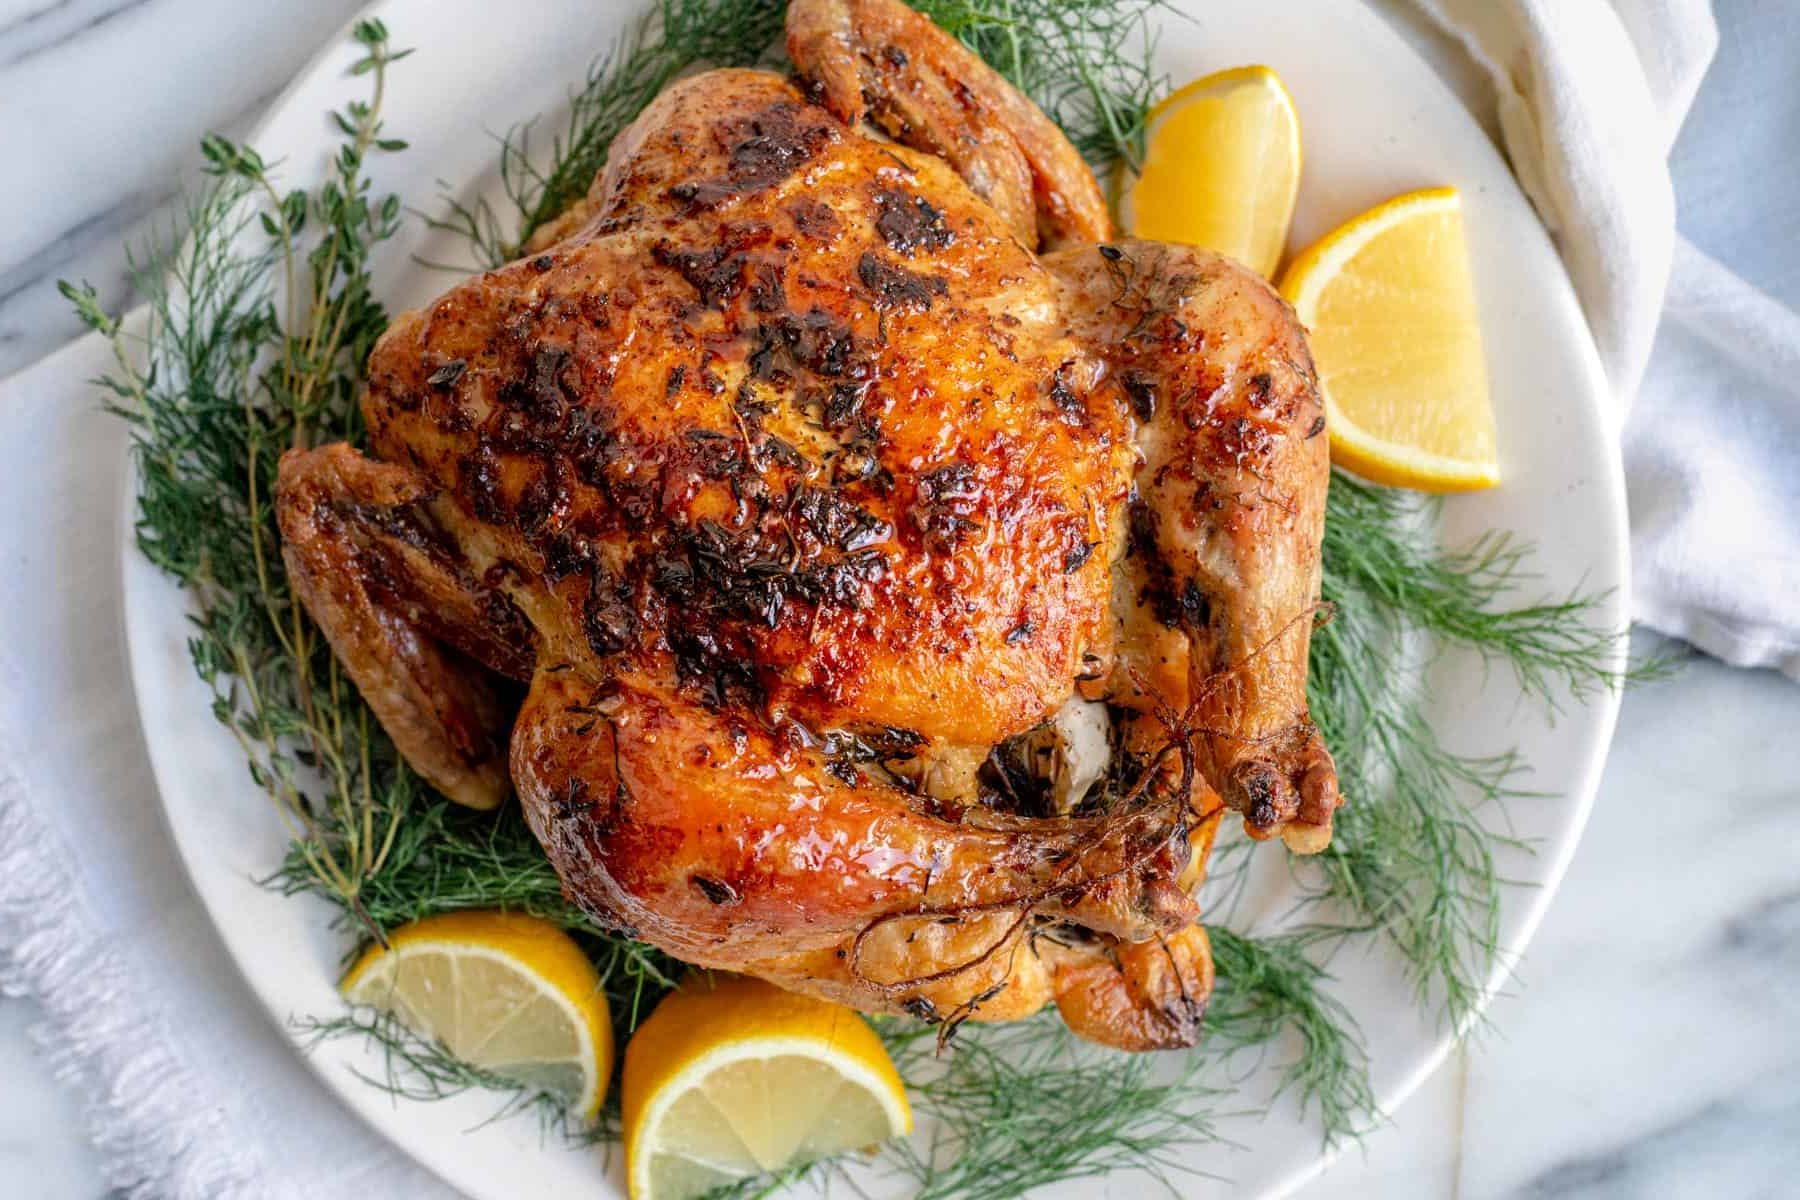 Lemon Garlic Oven Roasted Whole Chickens Recipe Details